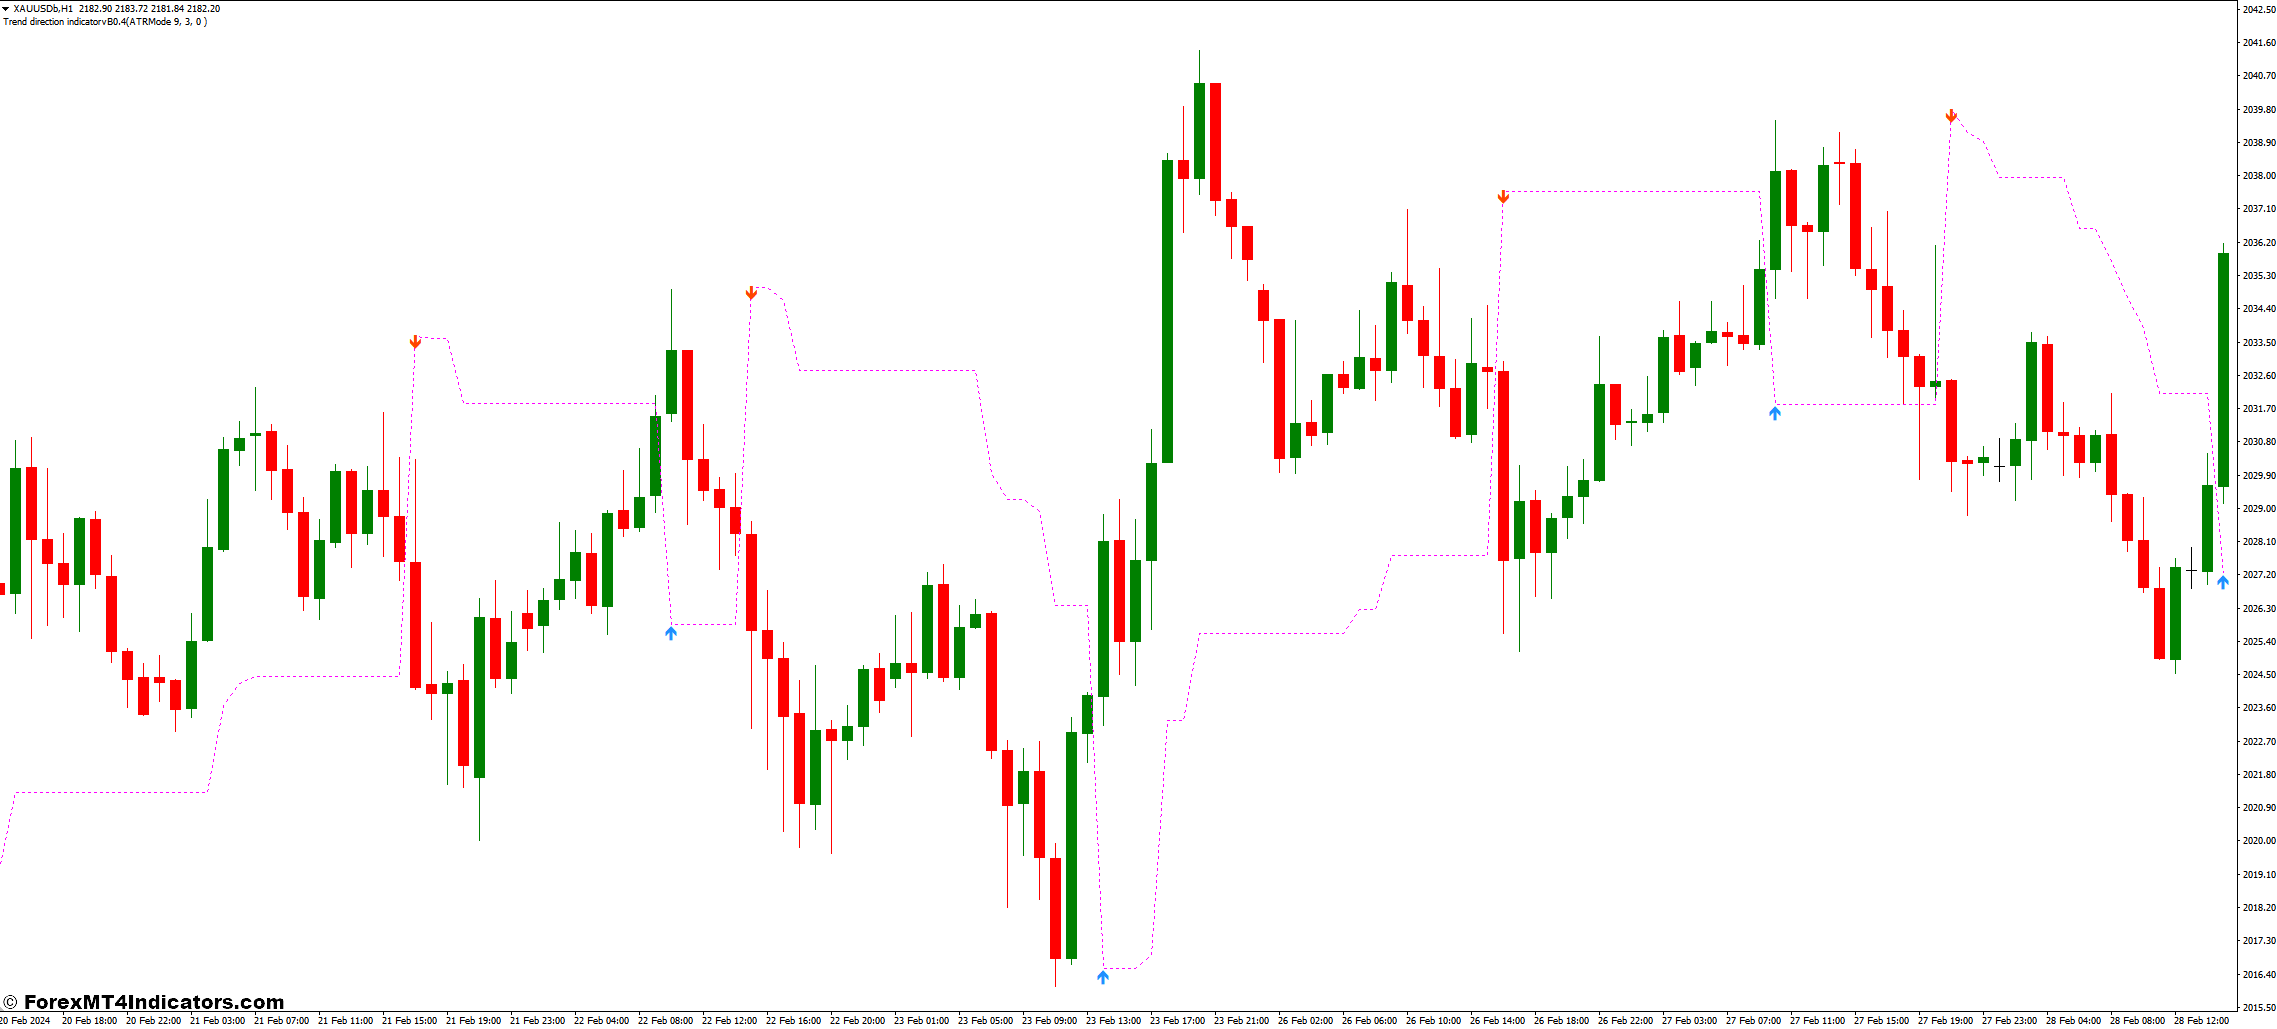 Advantages and Limitations of the Trend Direction MT4 Indicator